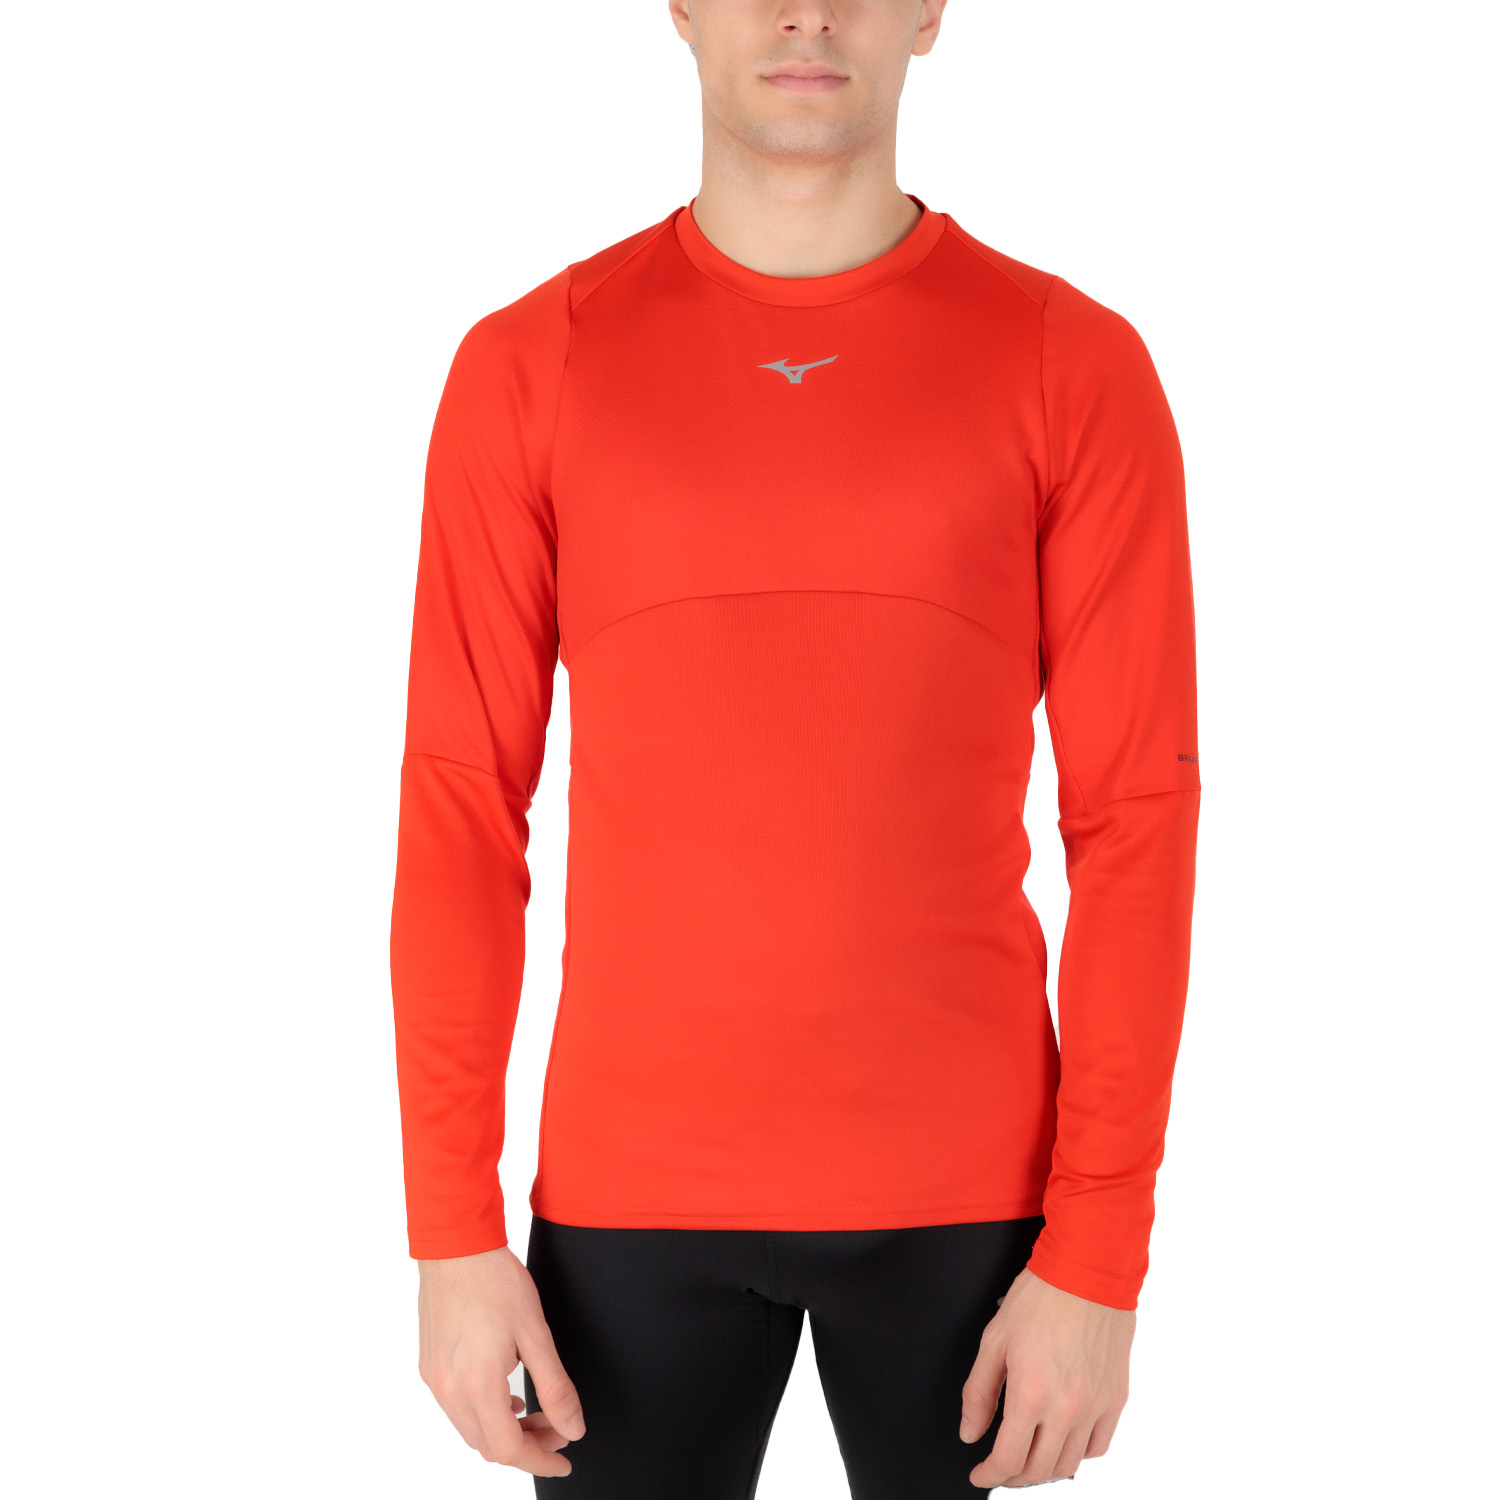 Mizuno Thermal Charge BT Shirt - Fiery Red